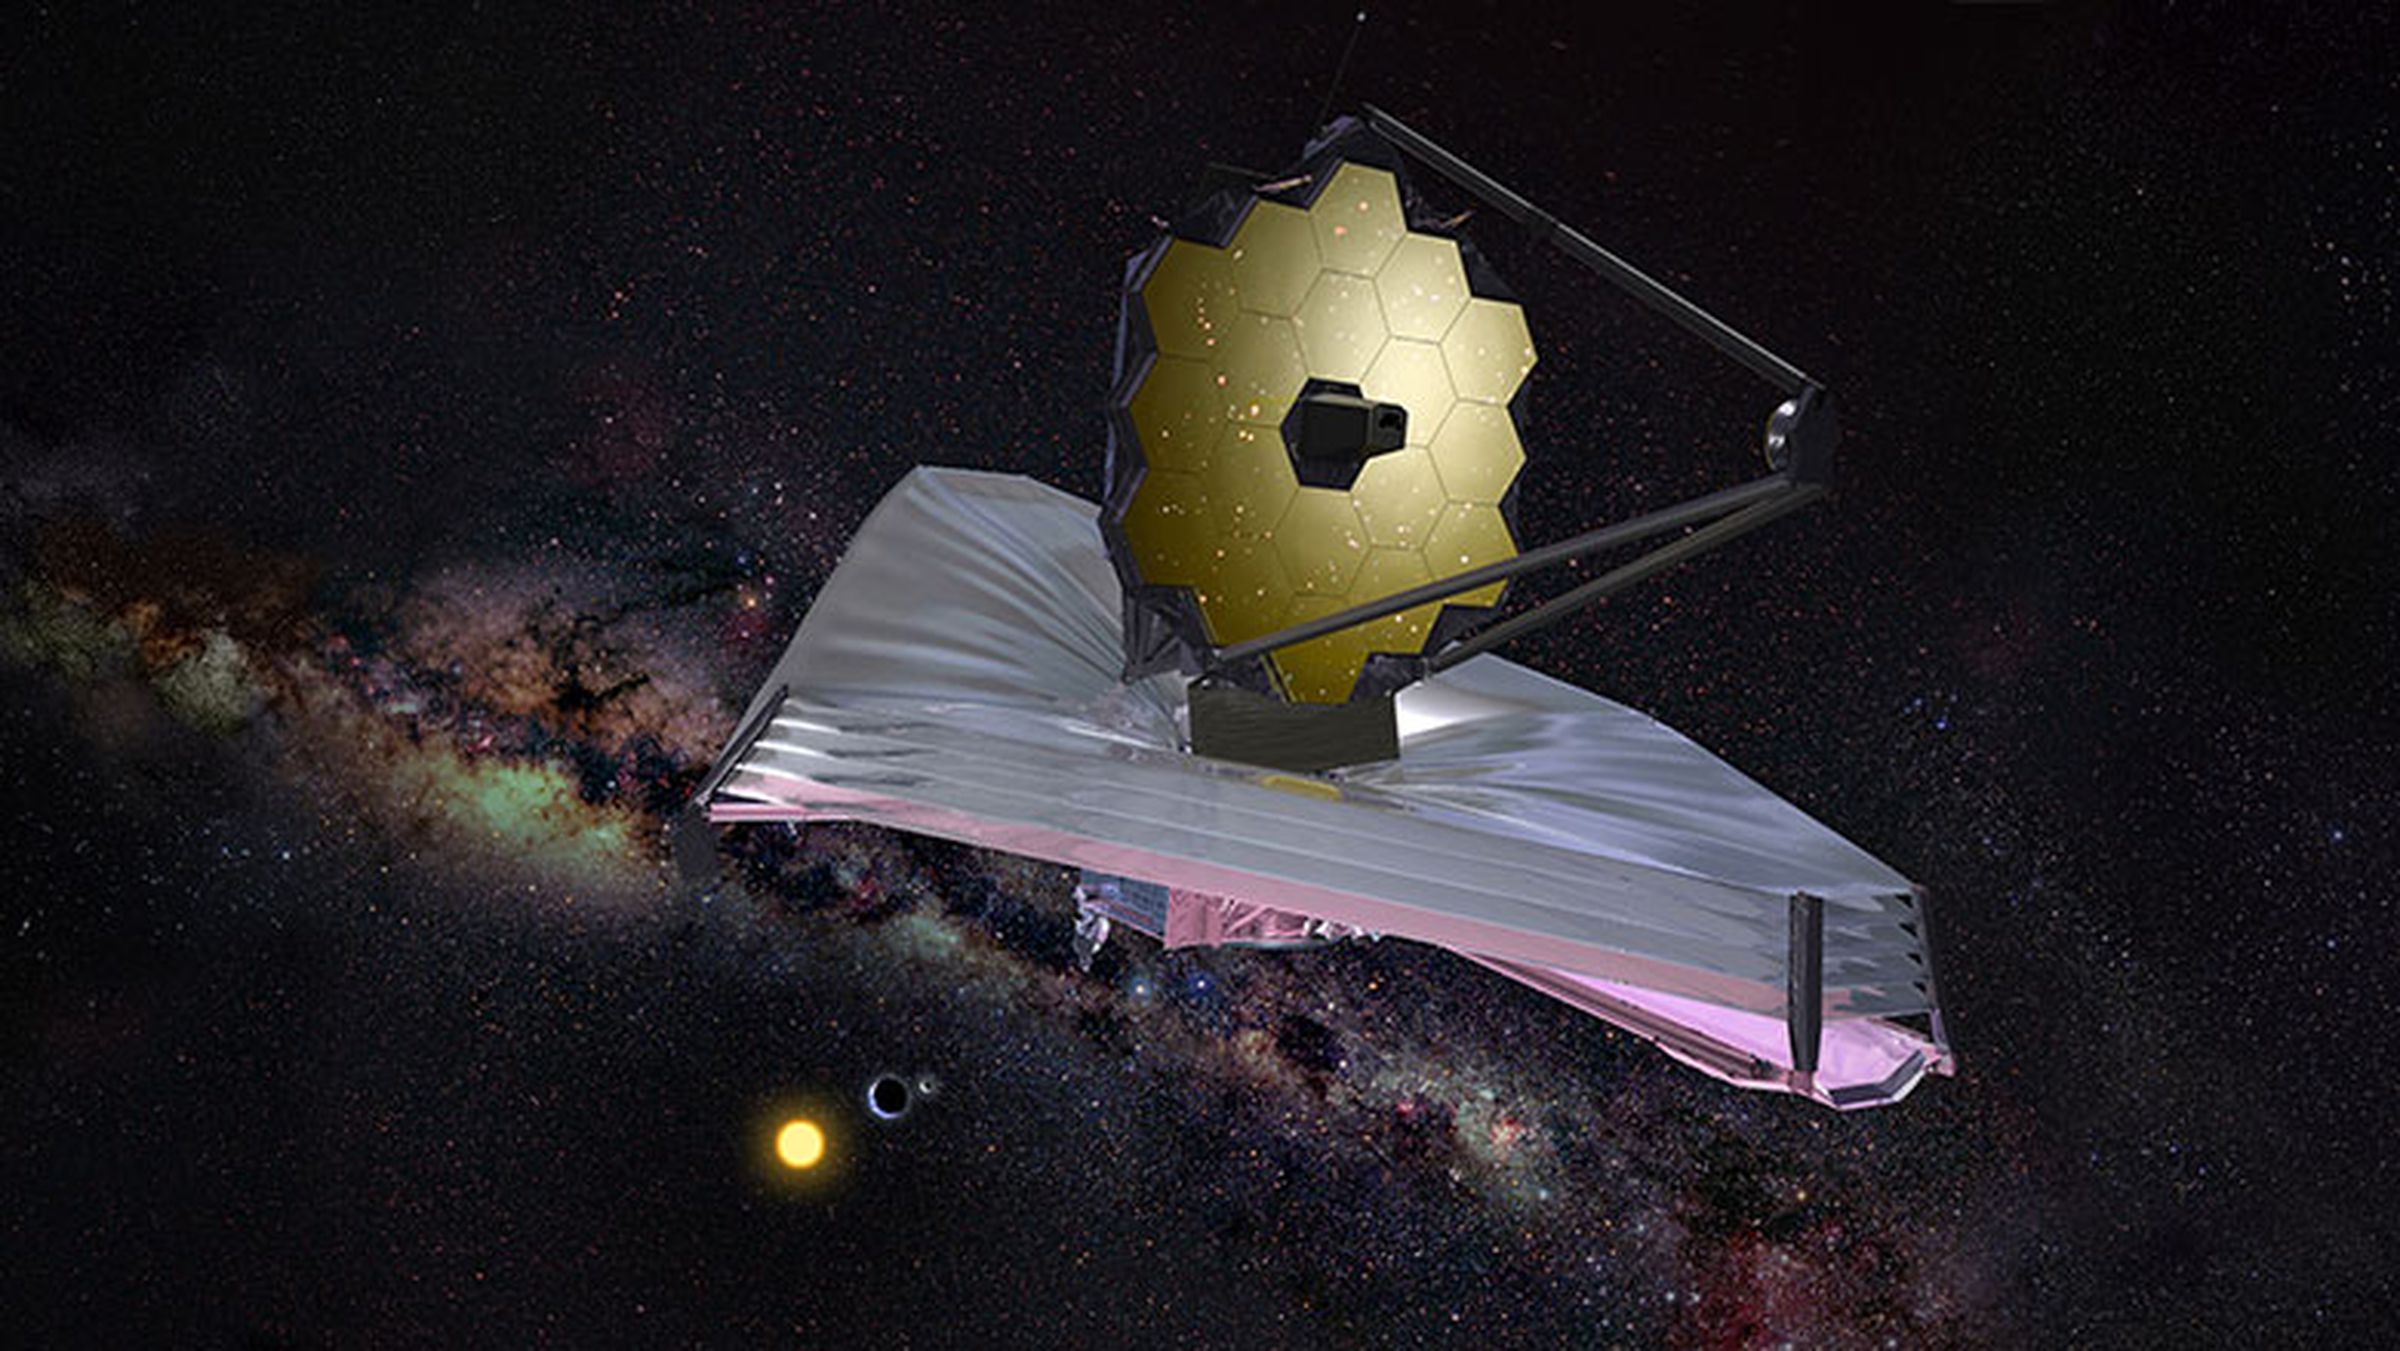 A rendering of the James Webb Space Telescope